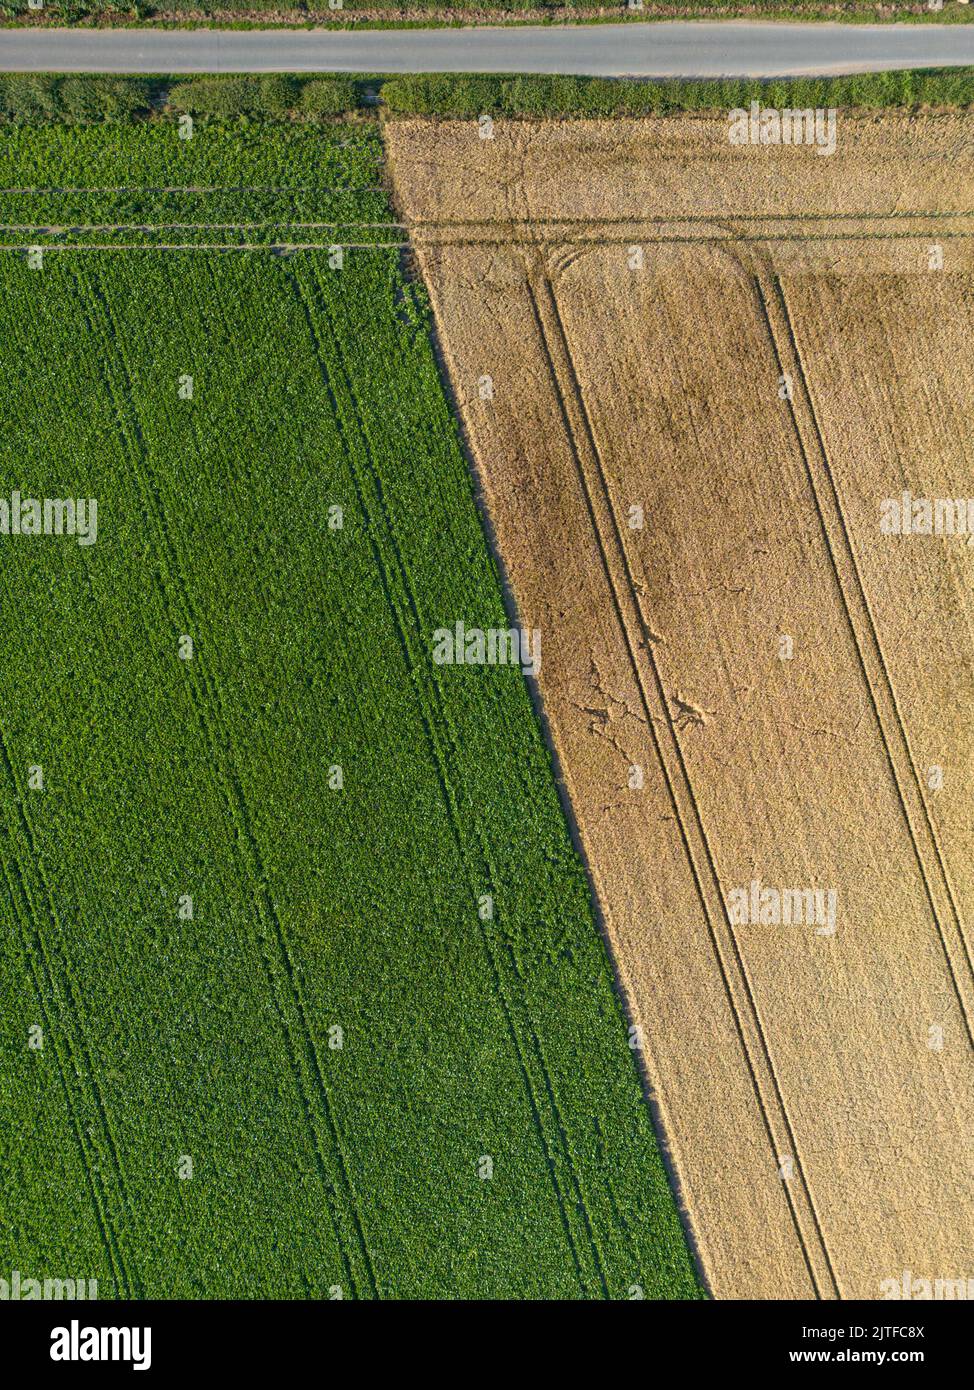 Aerial view of agricultural fields growing wheat crops ready for harvesting at harvest time. Crop farming in West Yorkshire. Stock Photo